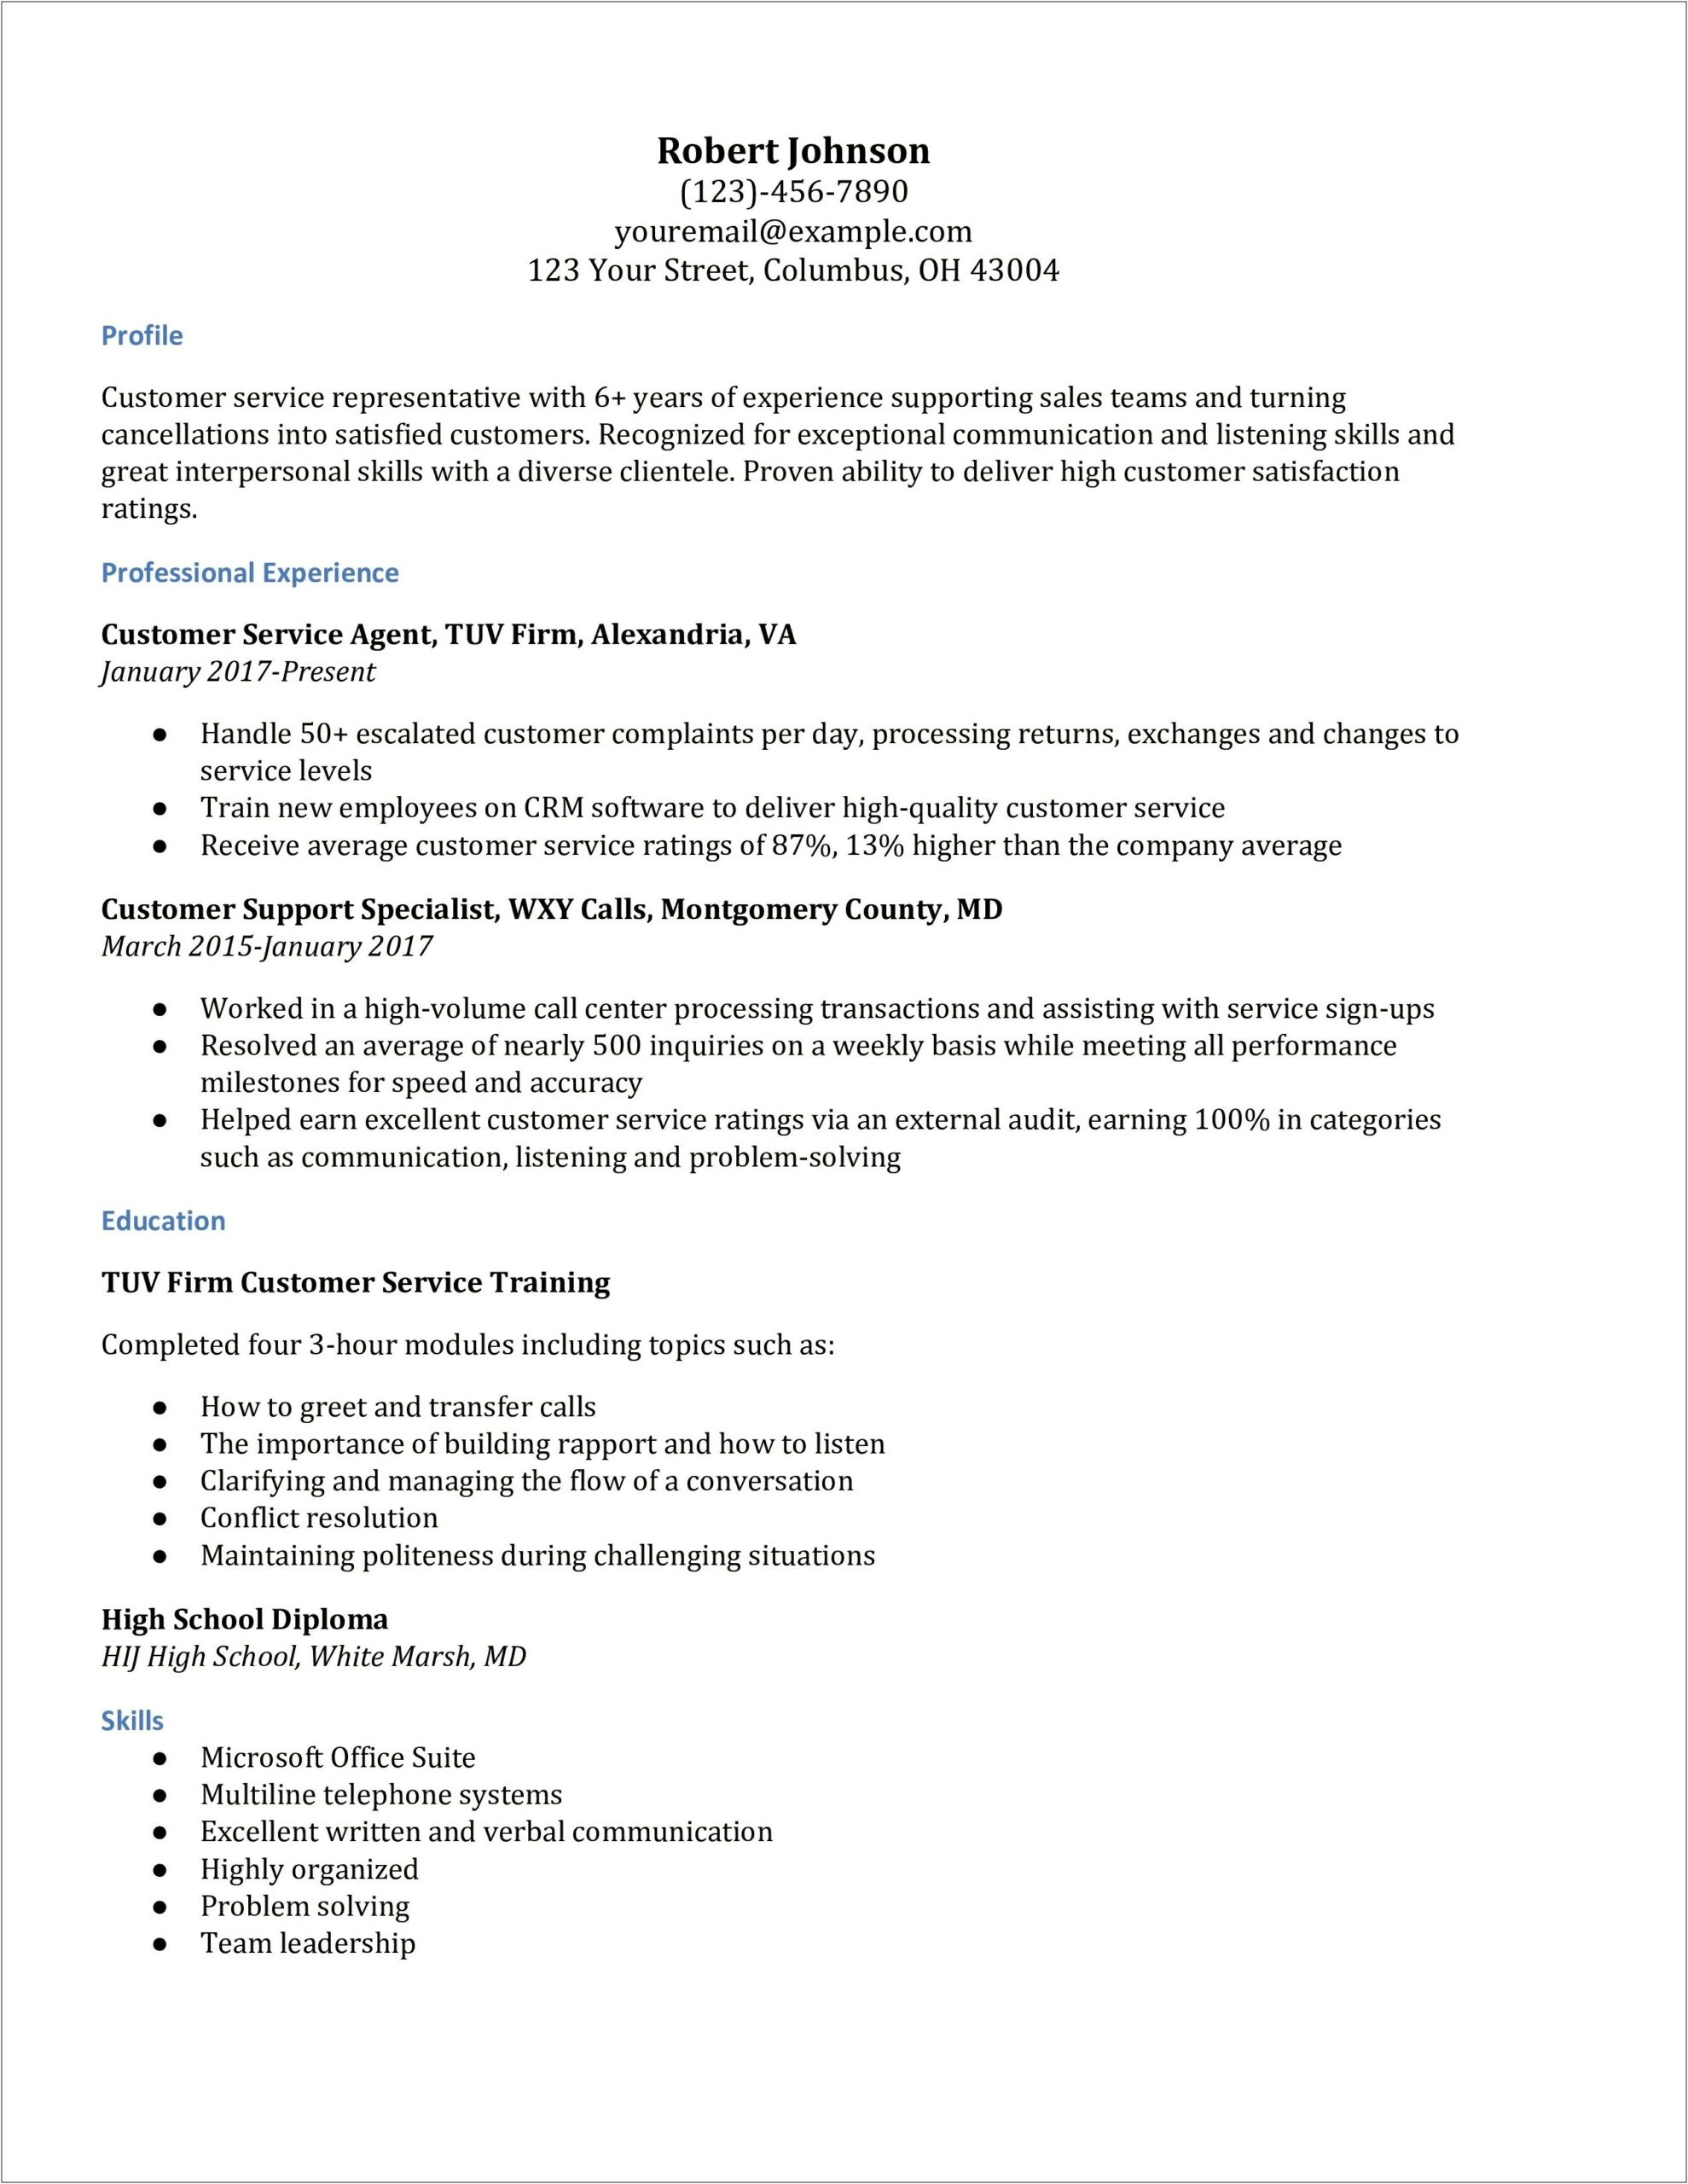 Customer Service Professional Profile Examples For Resume